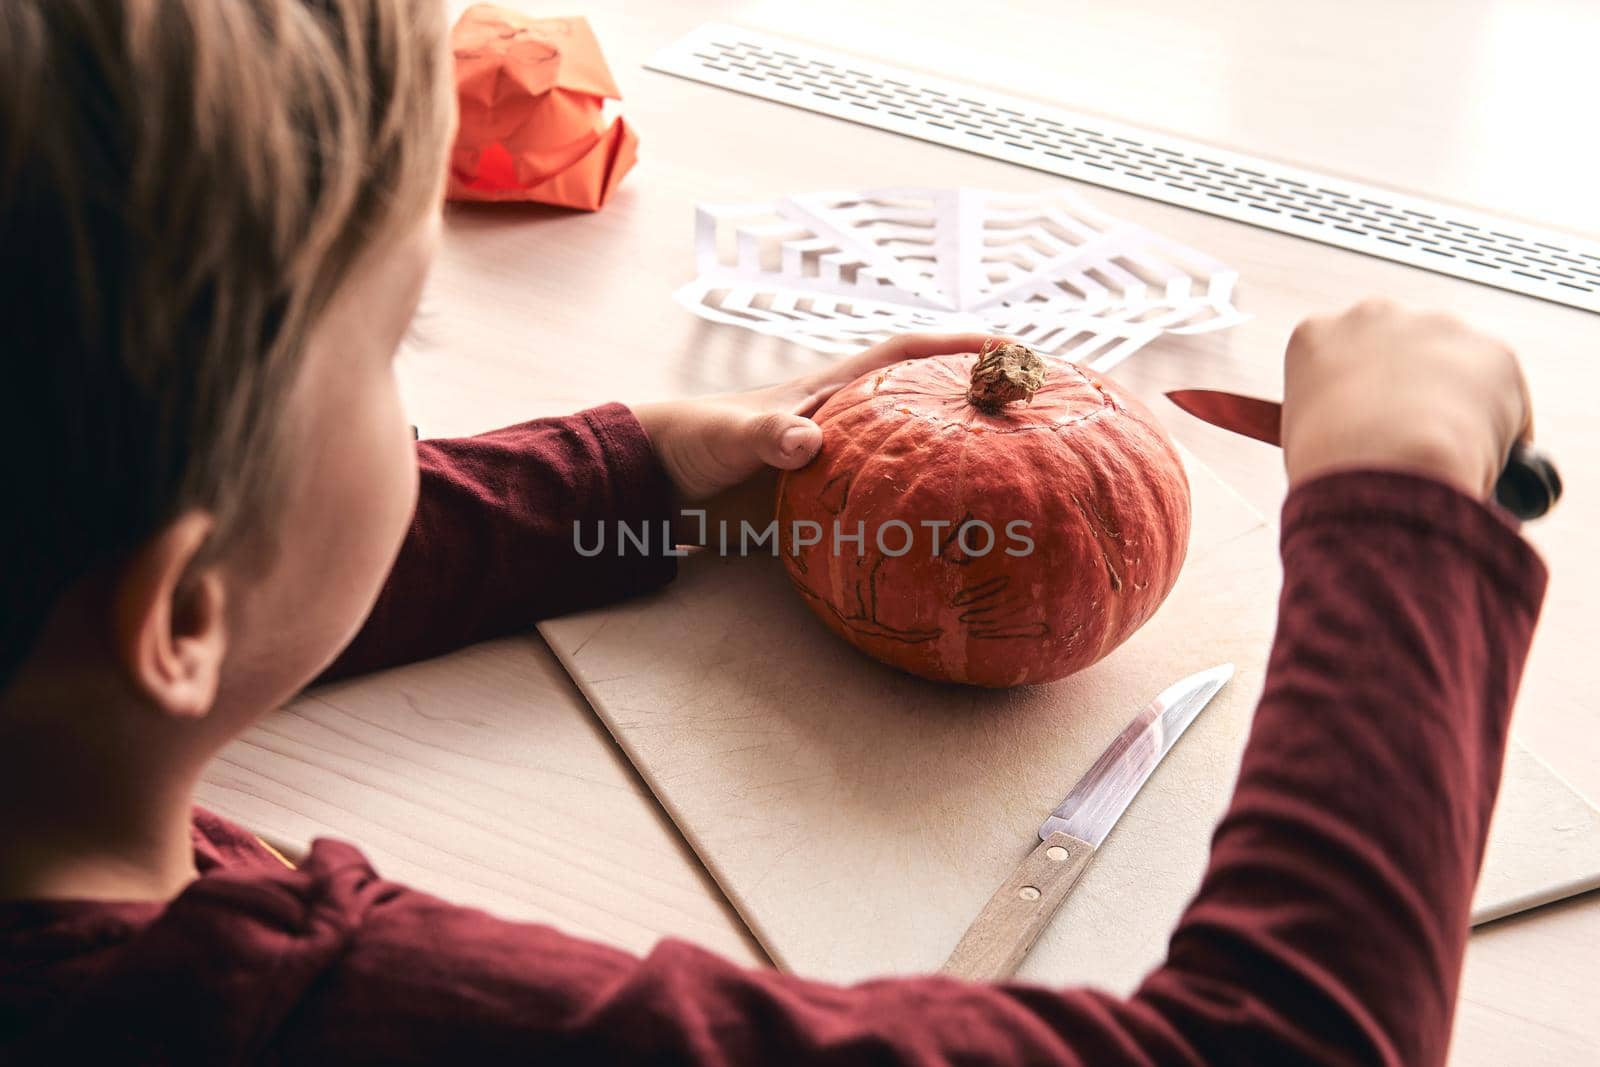 Halloween, decoration and holidays ideas- close up of kid with knife carving pumpkin or jack-o-lantern. 6 years boy has homefamily fun activity. Mom spending time with son together by OneWellStyudio